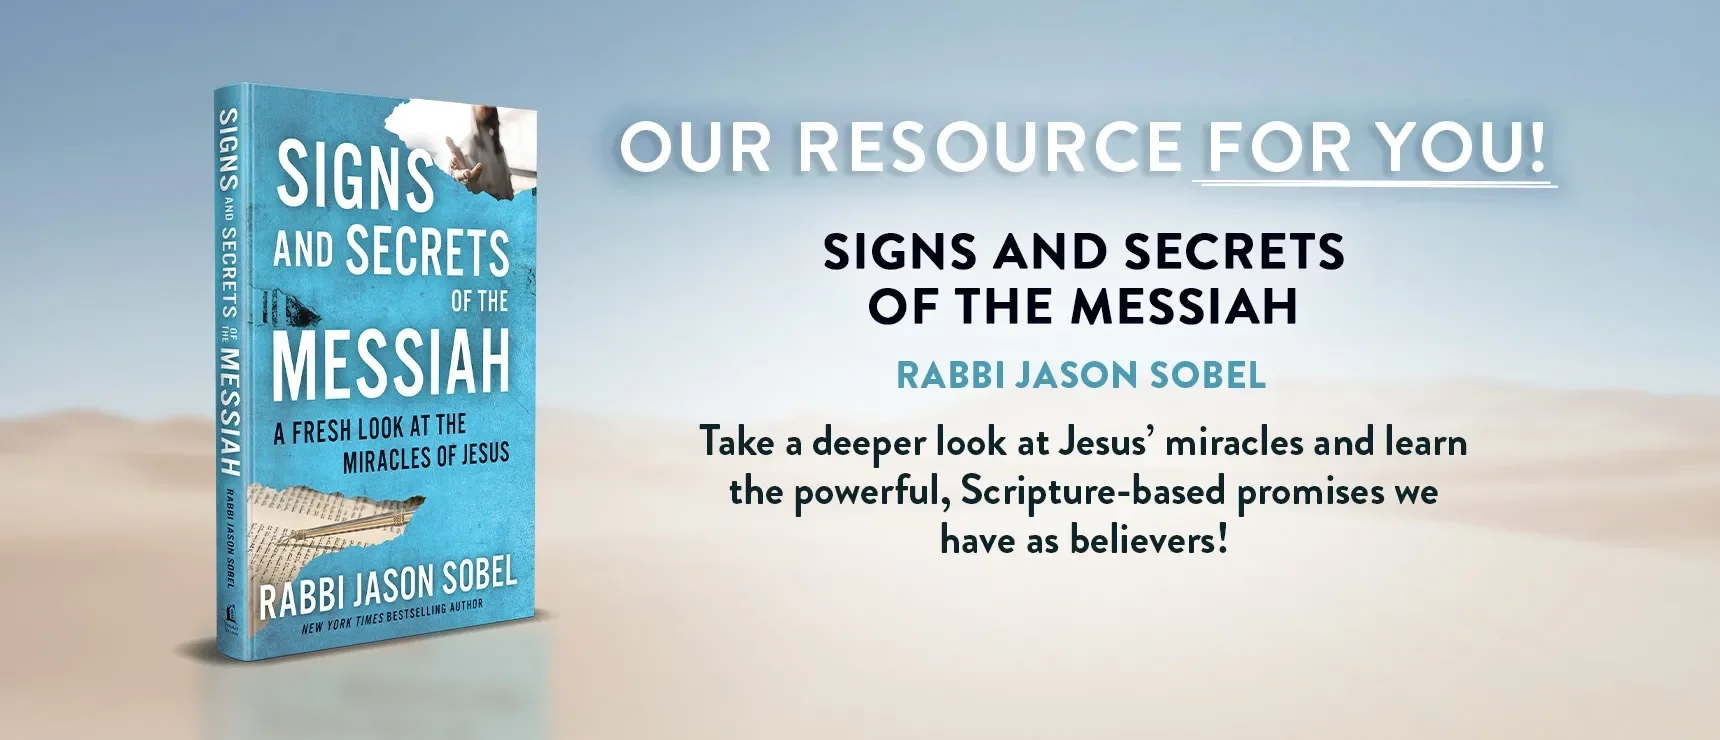 Signs and Secrets of the Messiah by Rabbi Jason Sobel